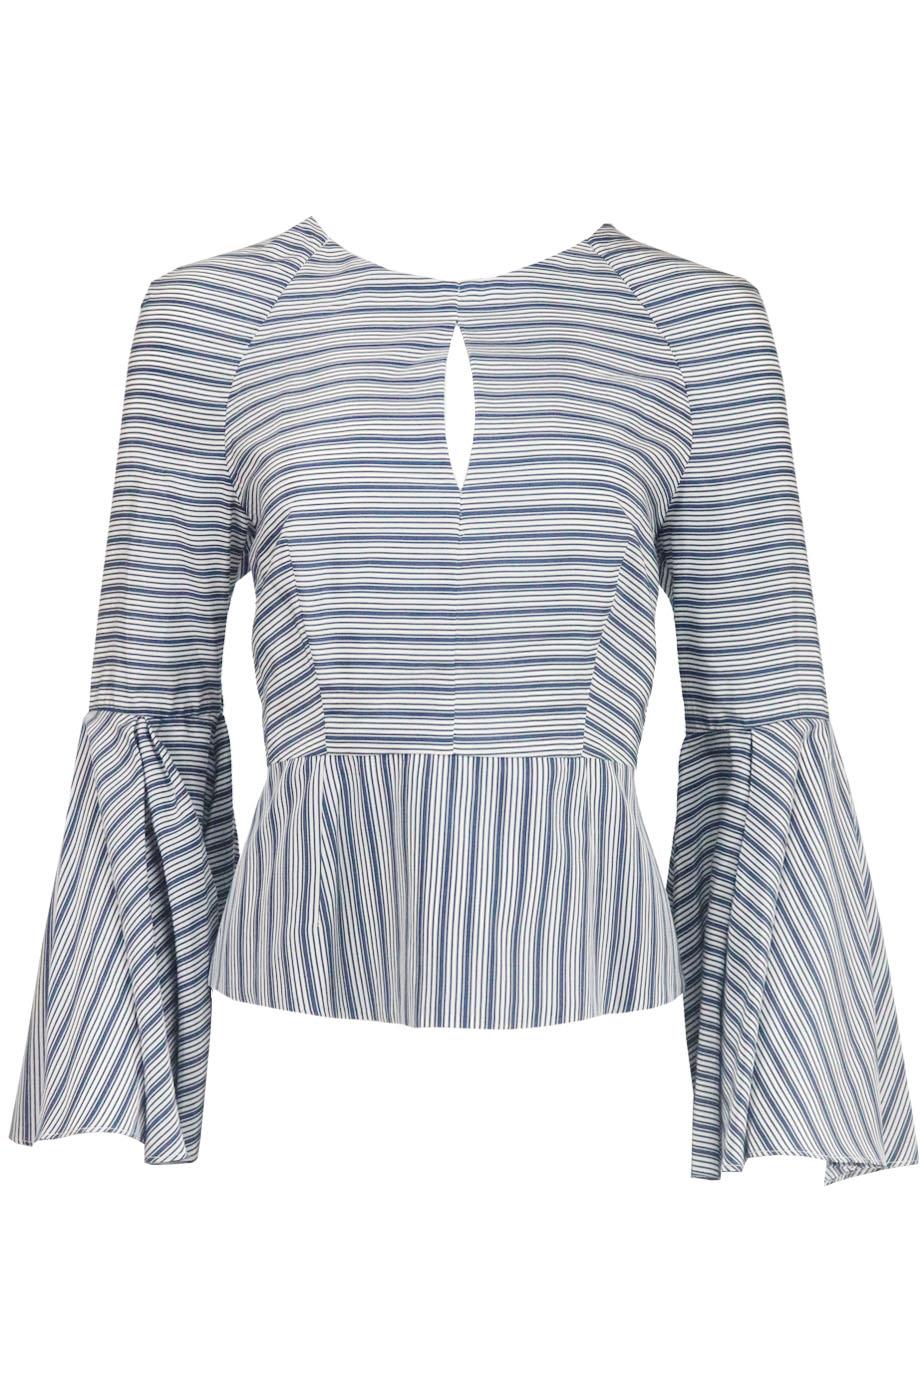 MILLY FLUTED STRIPED COTTON BLEND SHIRT US 10 UK 14